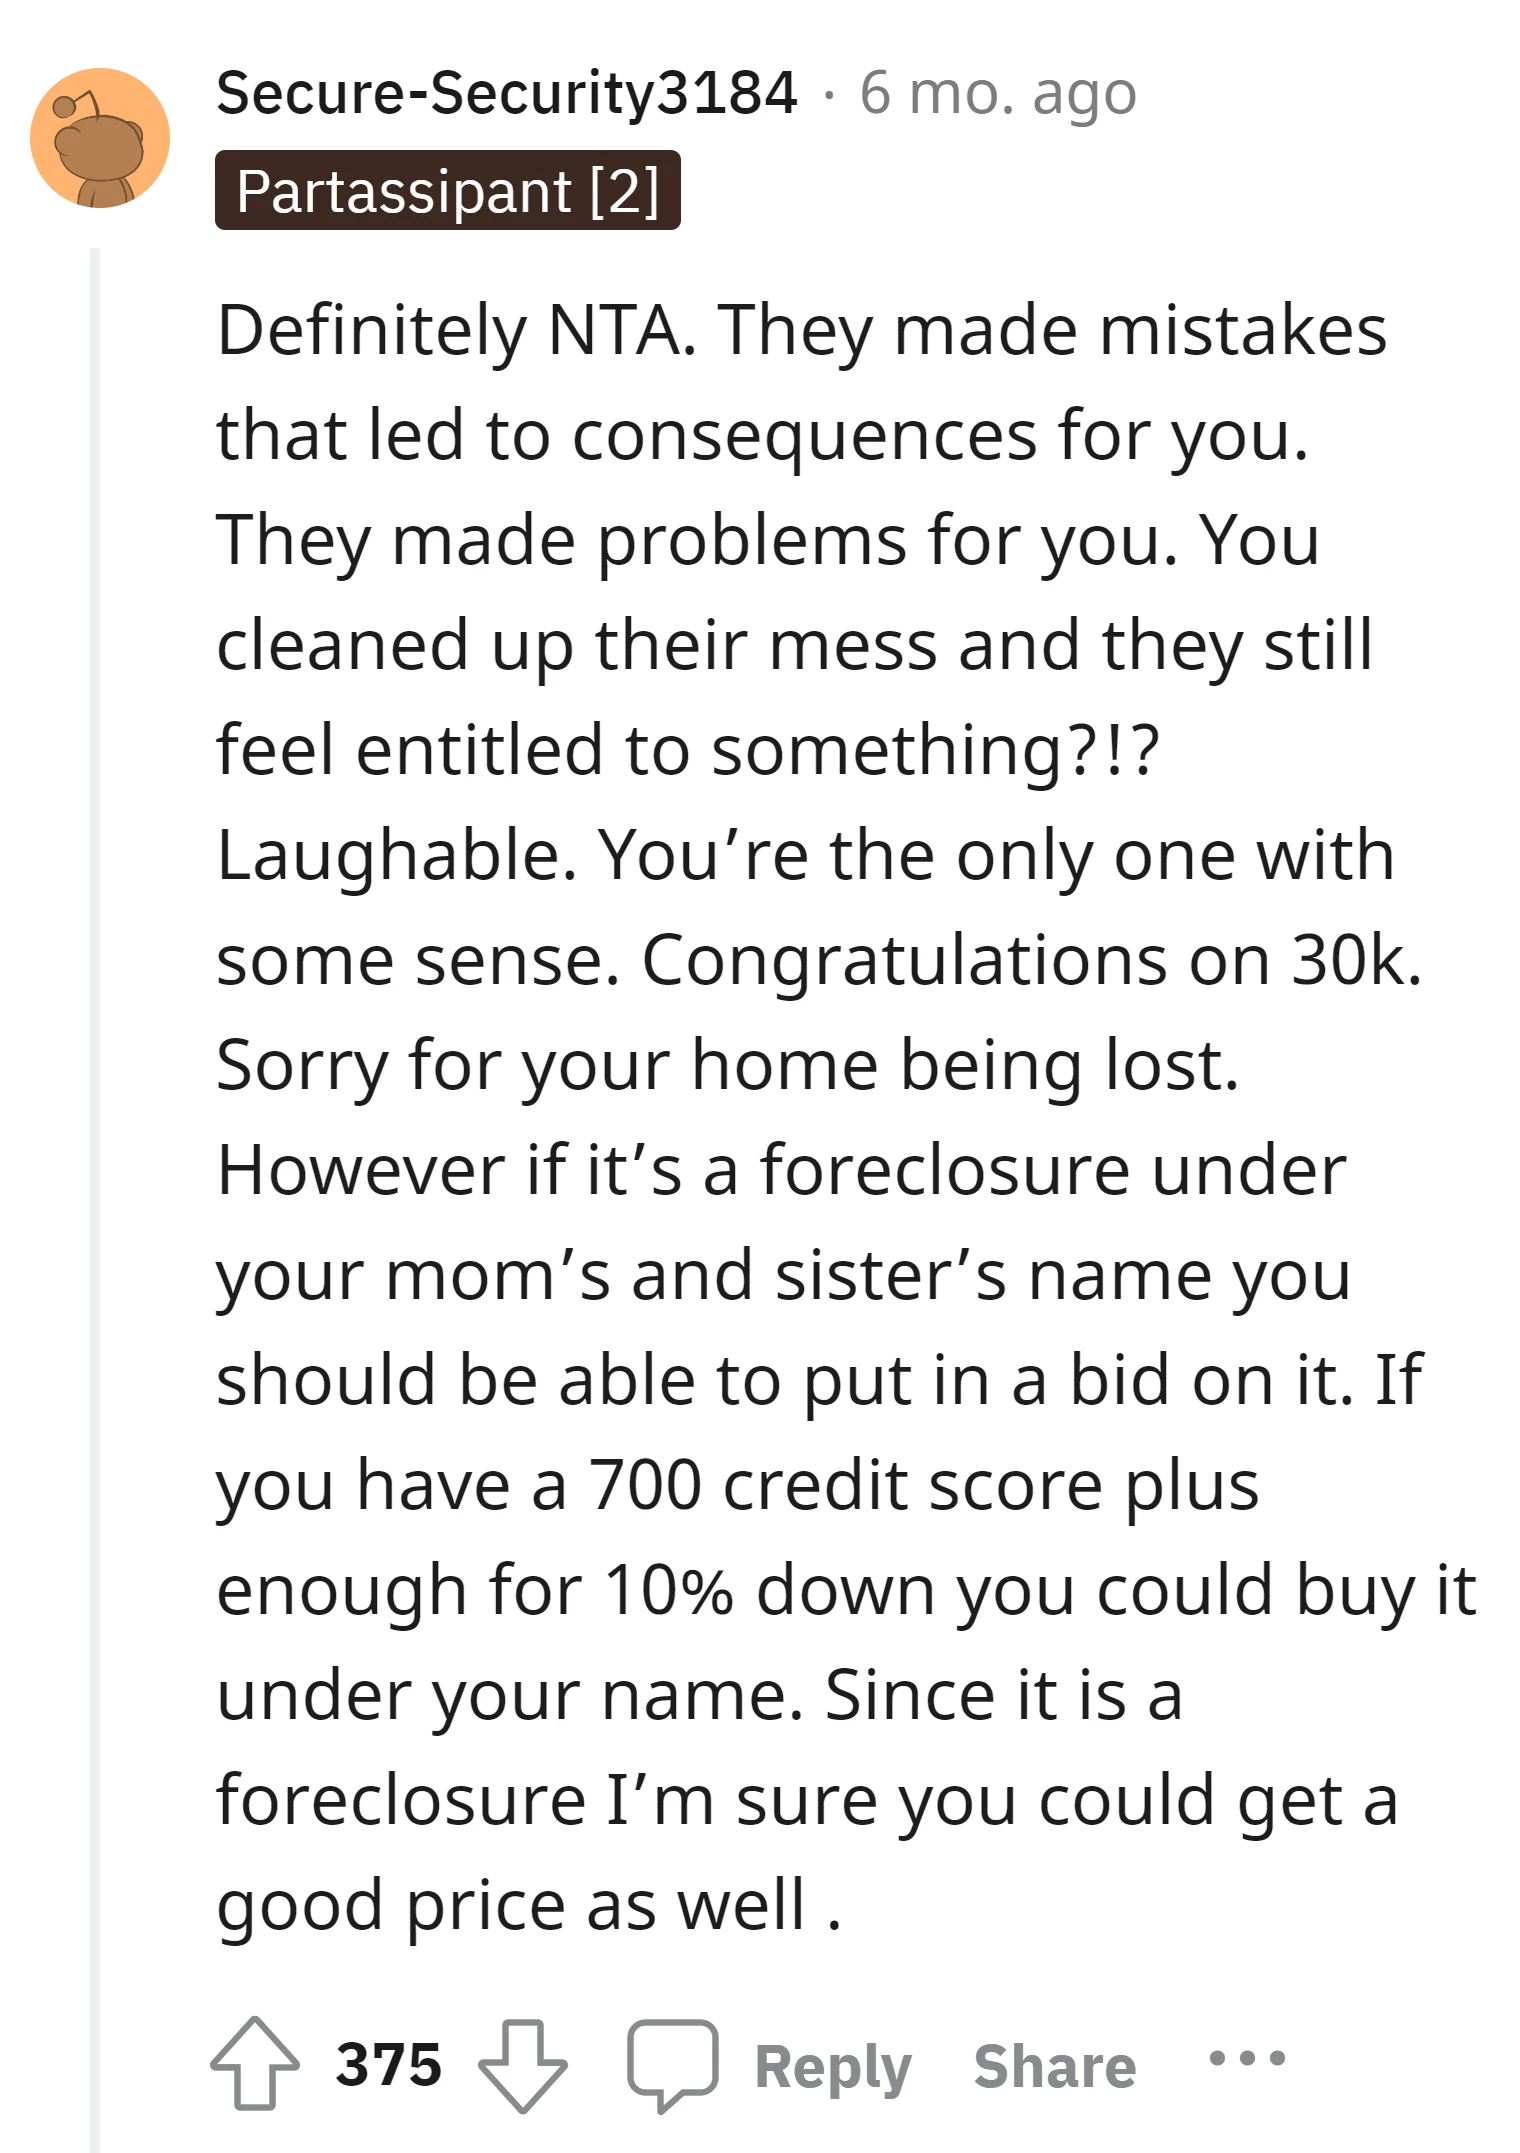 The OP is not in the wrong for keeping the $30k after cleaning up their family's financial mess